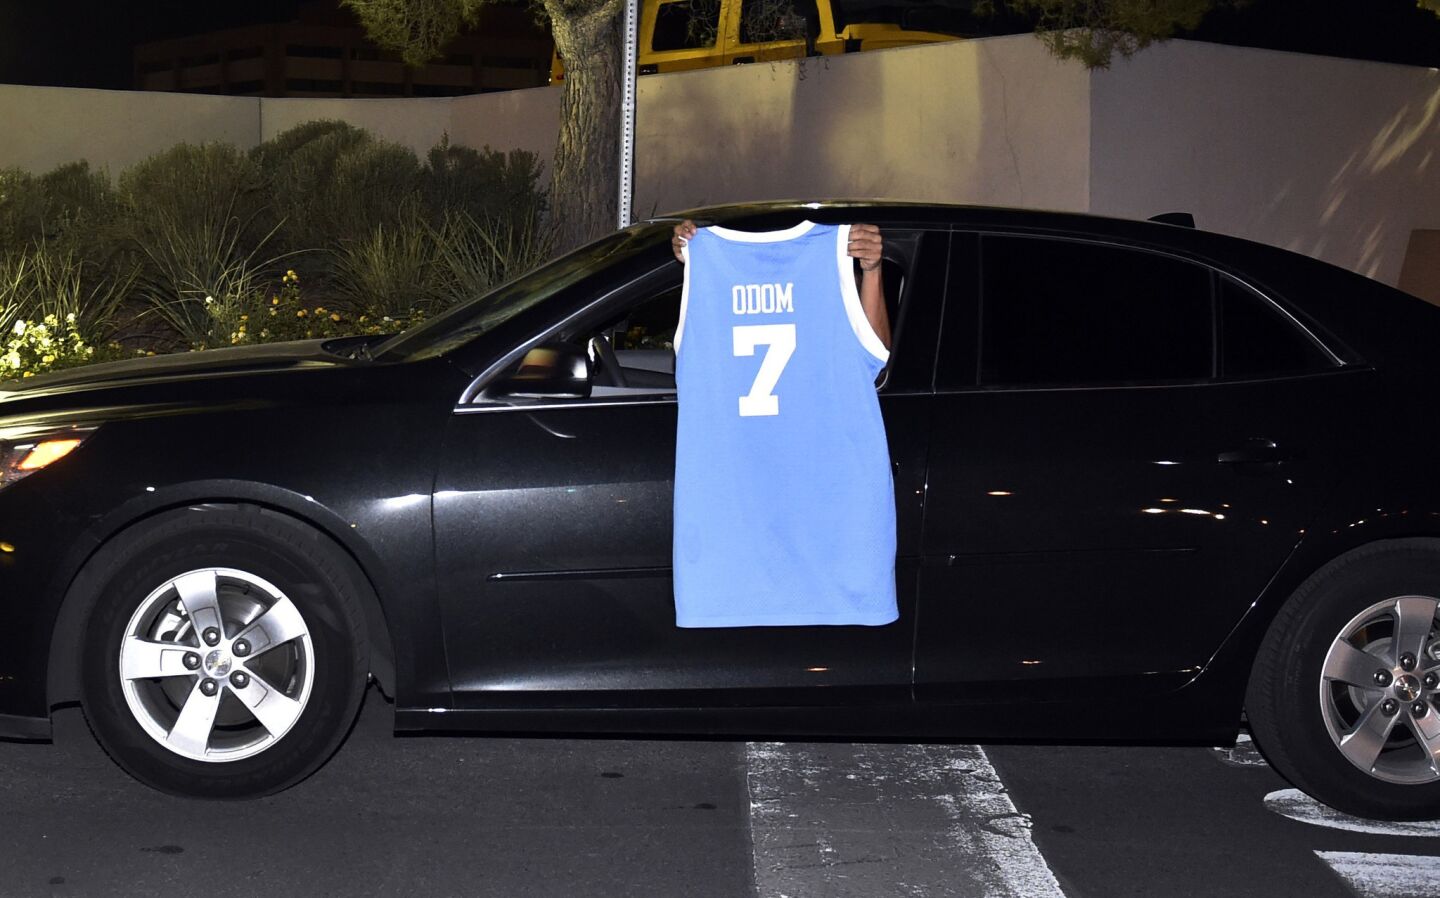 A driver displays a basketball jersey with Lamar Odom's name as the driver exits Sunrise Hospital and Medical Center on Oct. 13, 2015, in Las Vegas. The former NBA basketball player was hospitalized after he was found unconscious Tuesday at a Nevada brothel, authorities said.